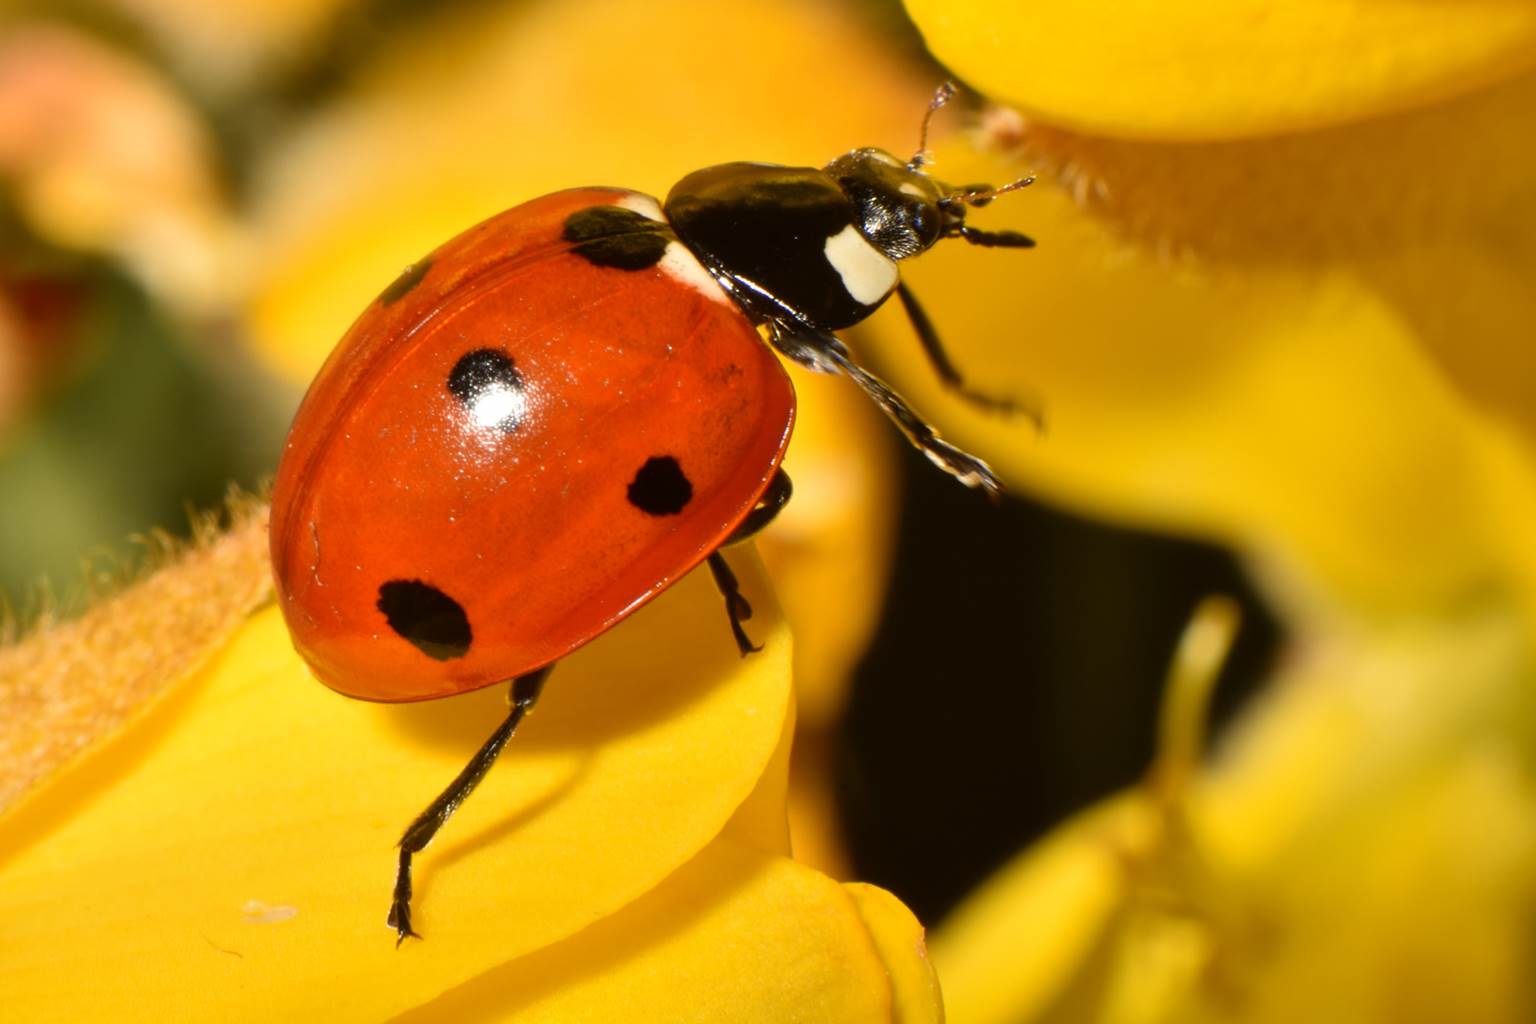 A small insect on a flower

Description automatically generated